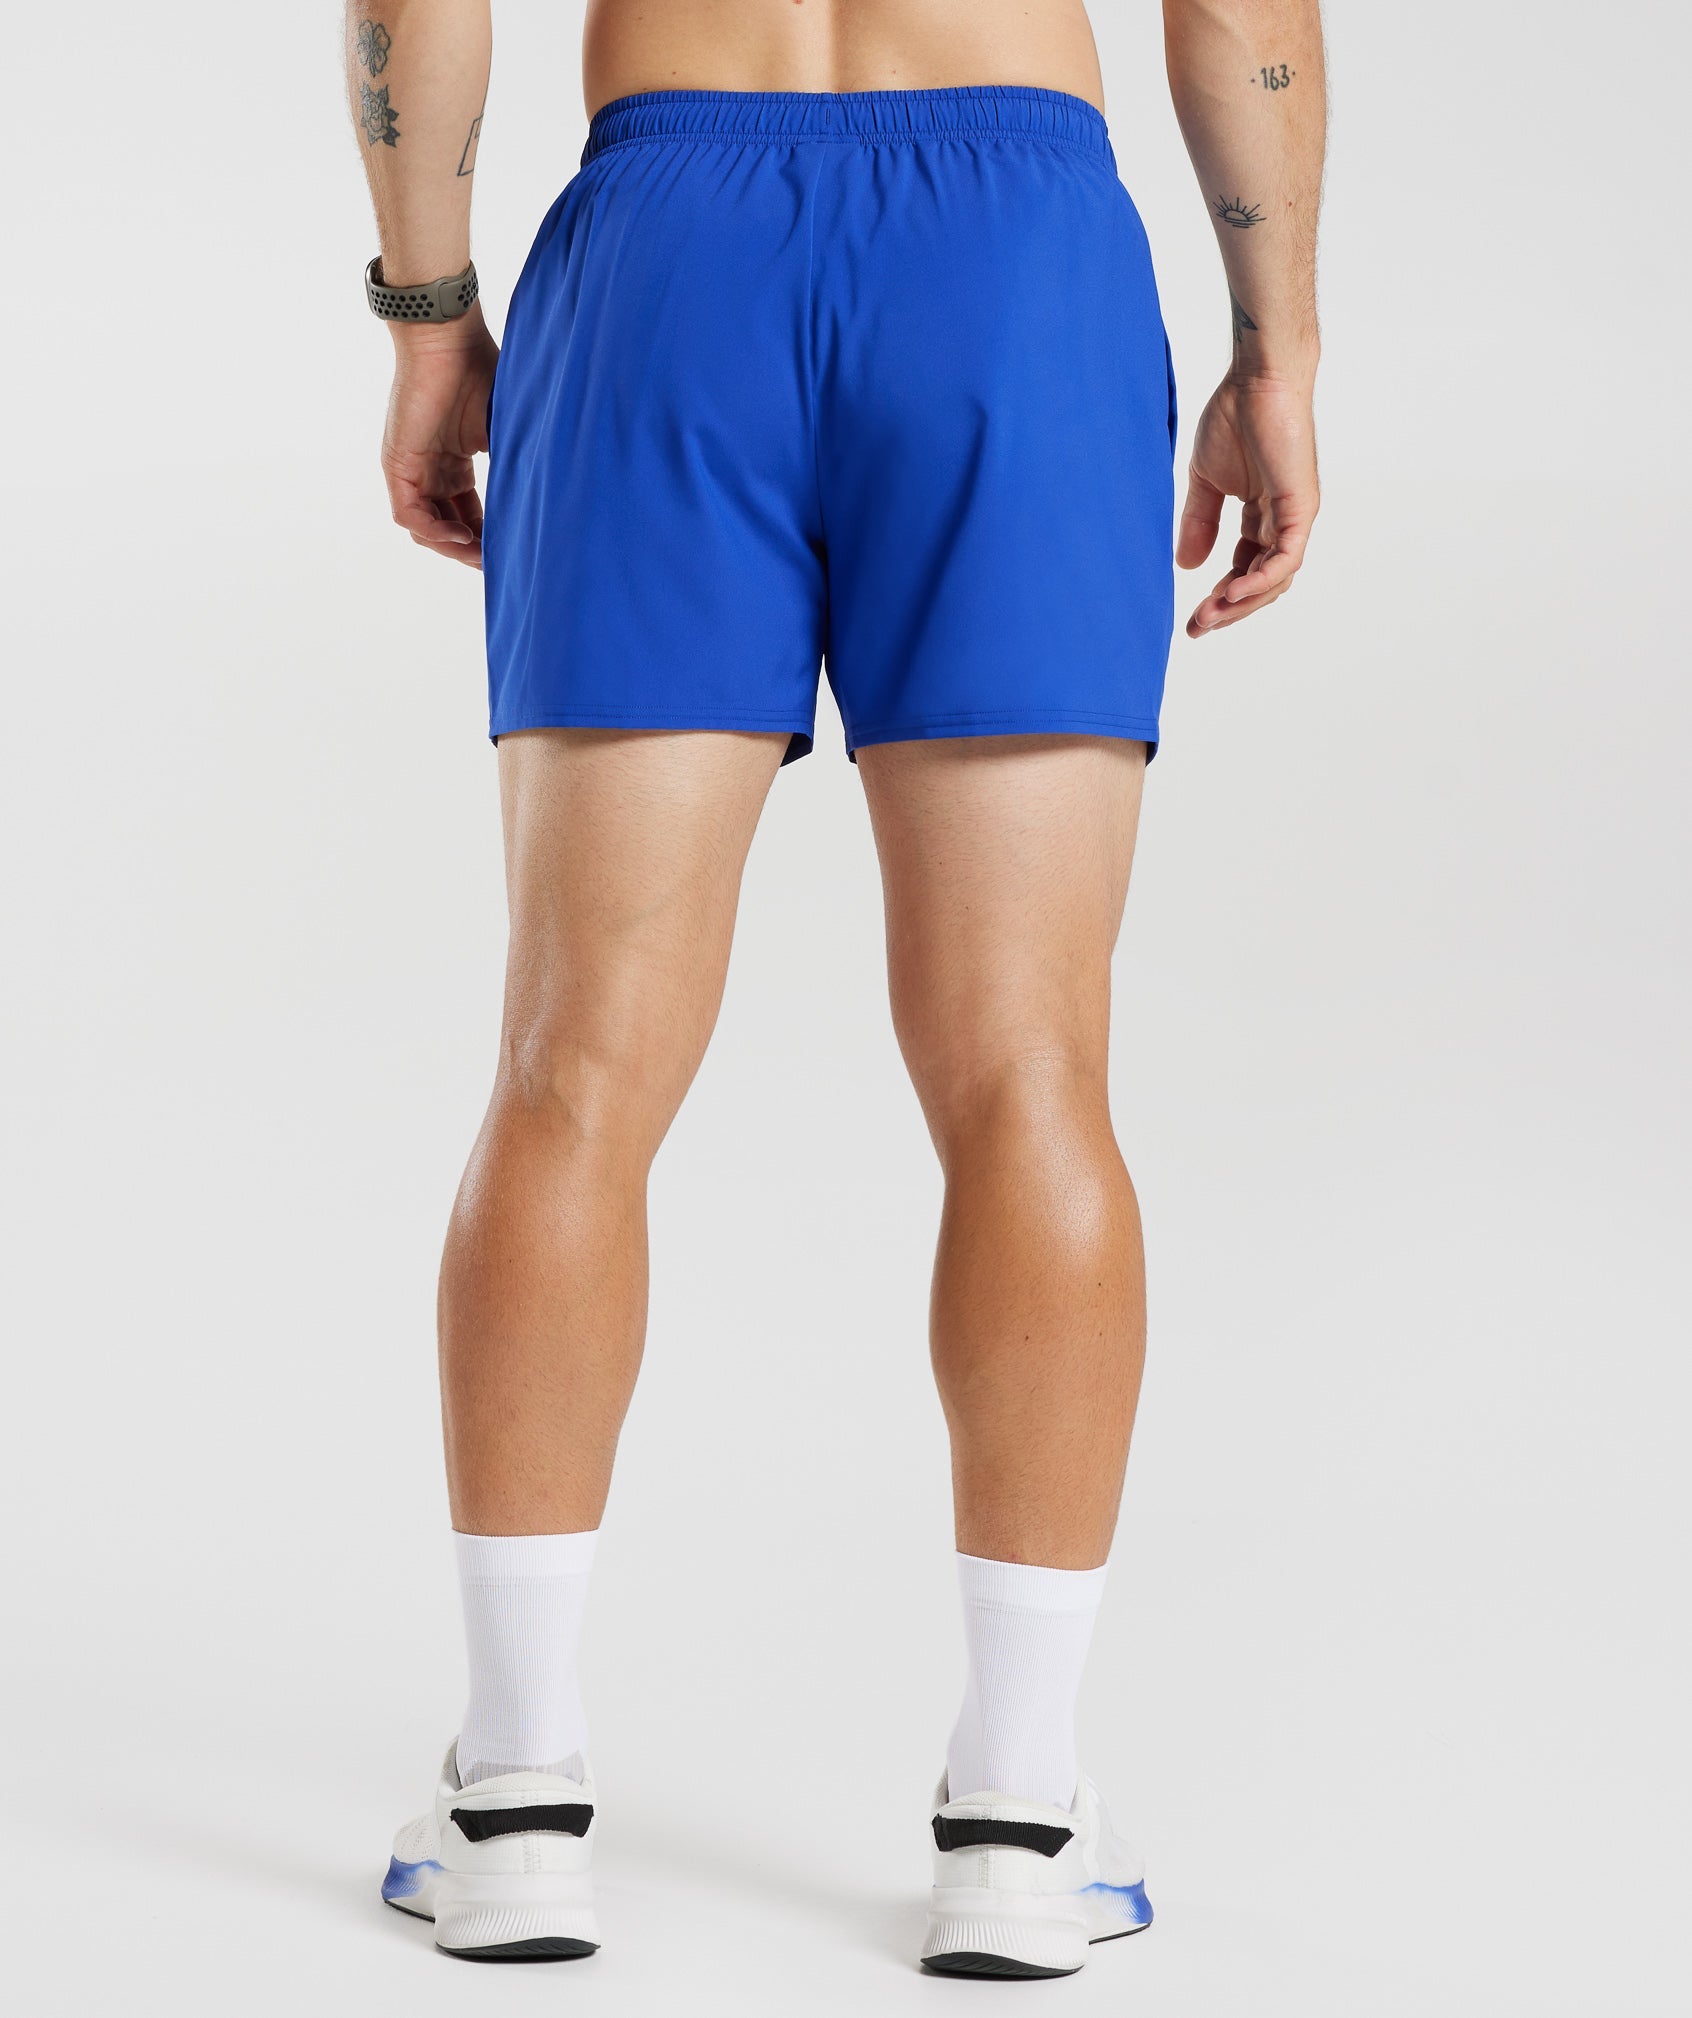 Arrival 5" Shorts in Vintage Blue - view 2